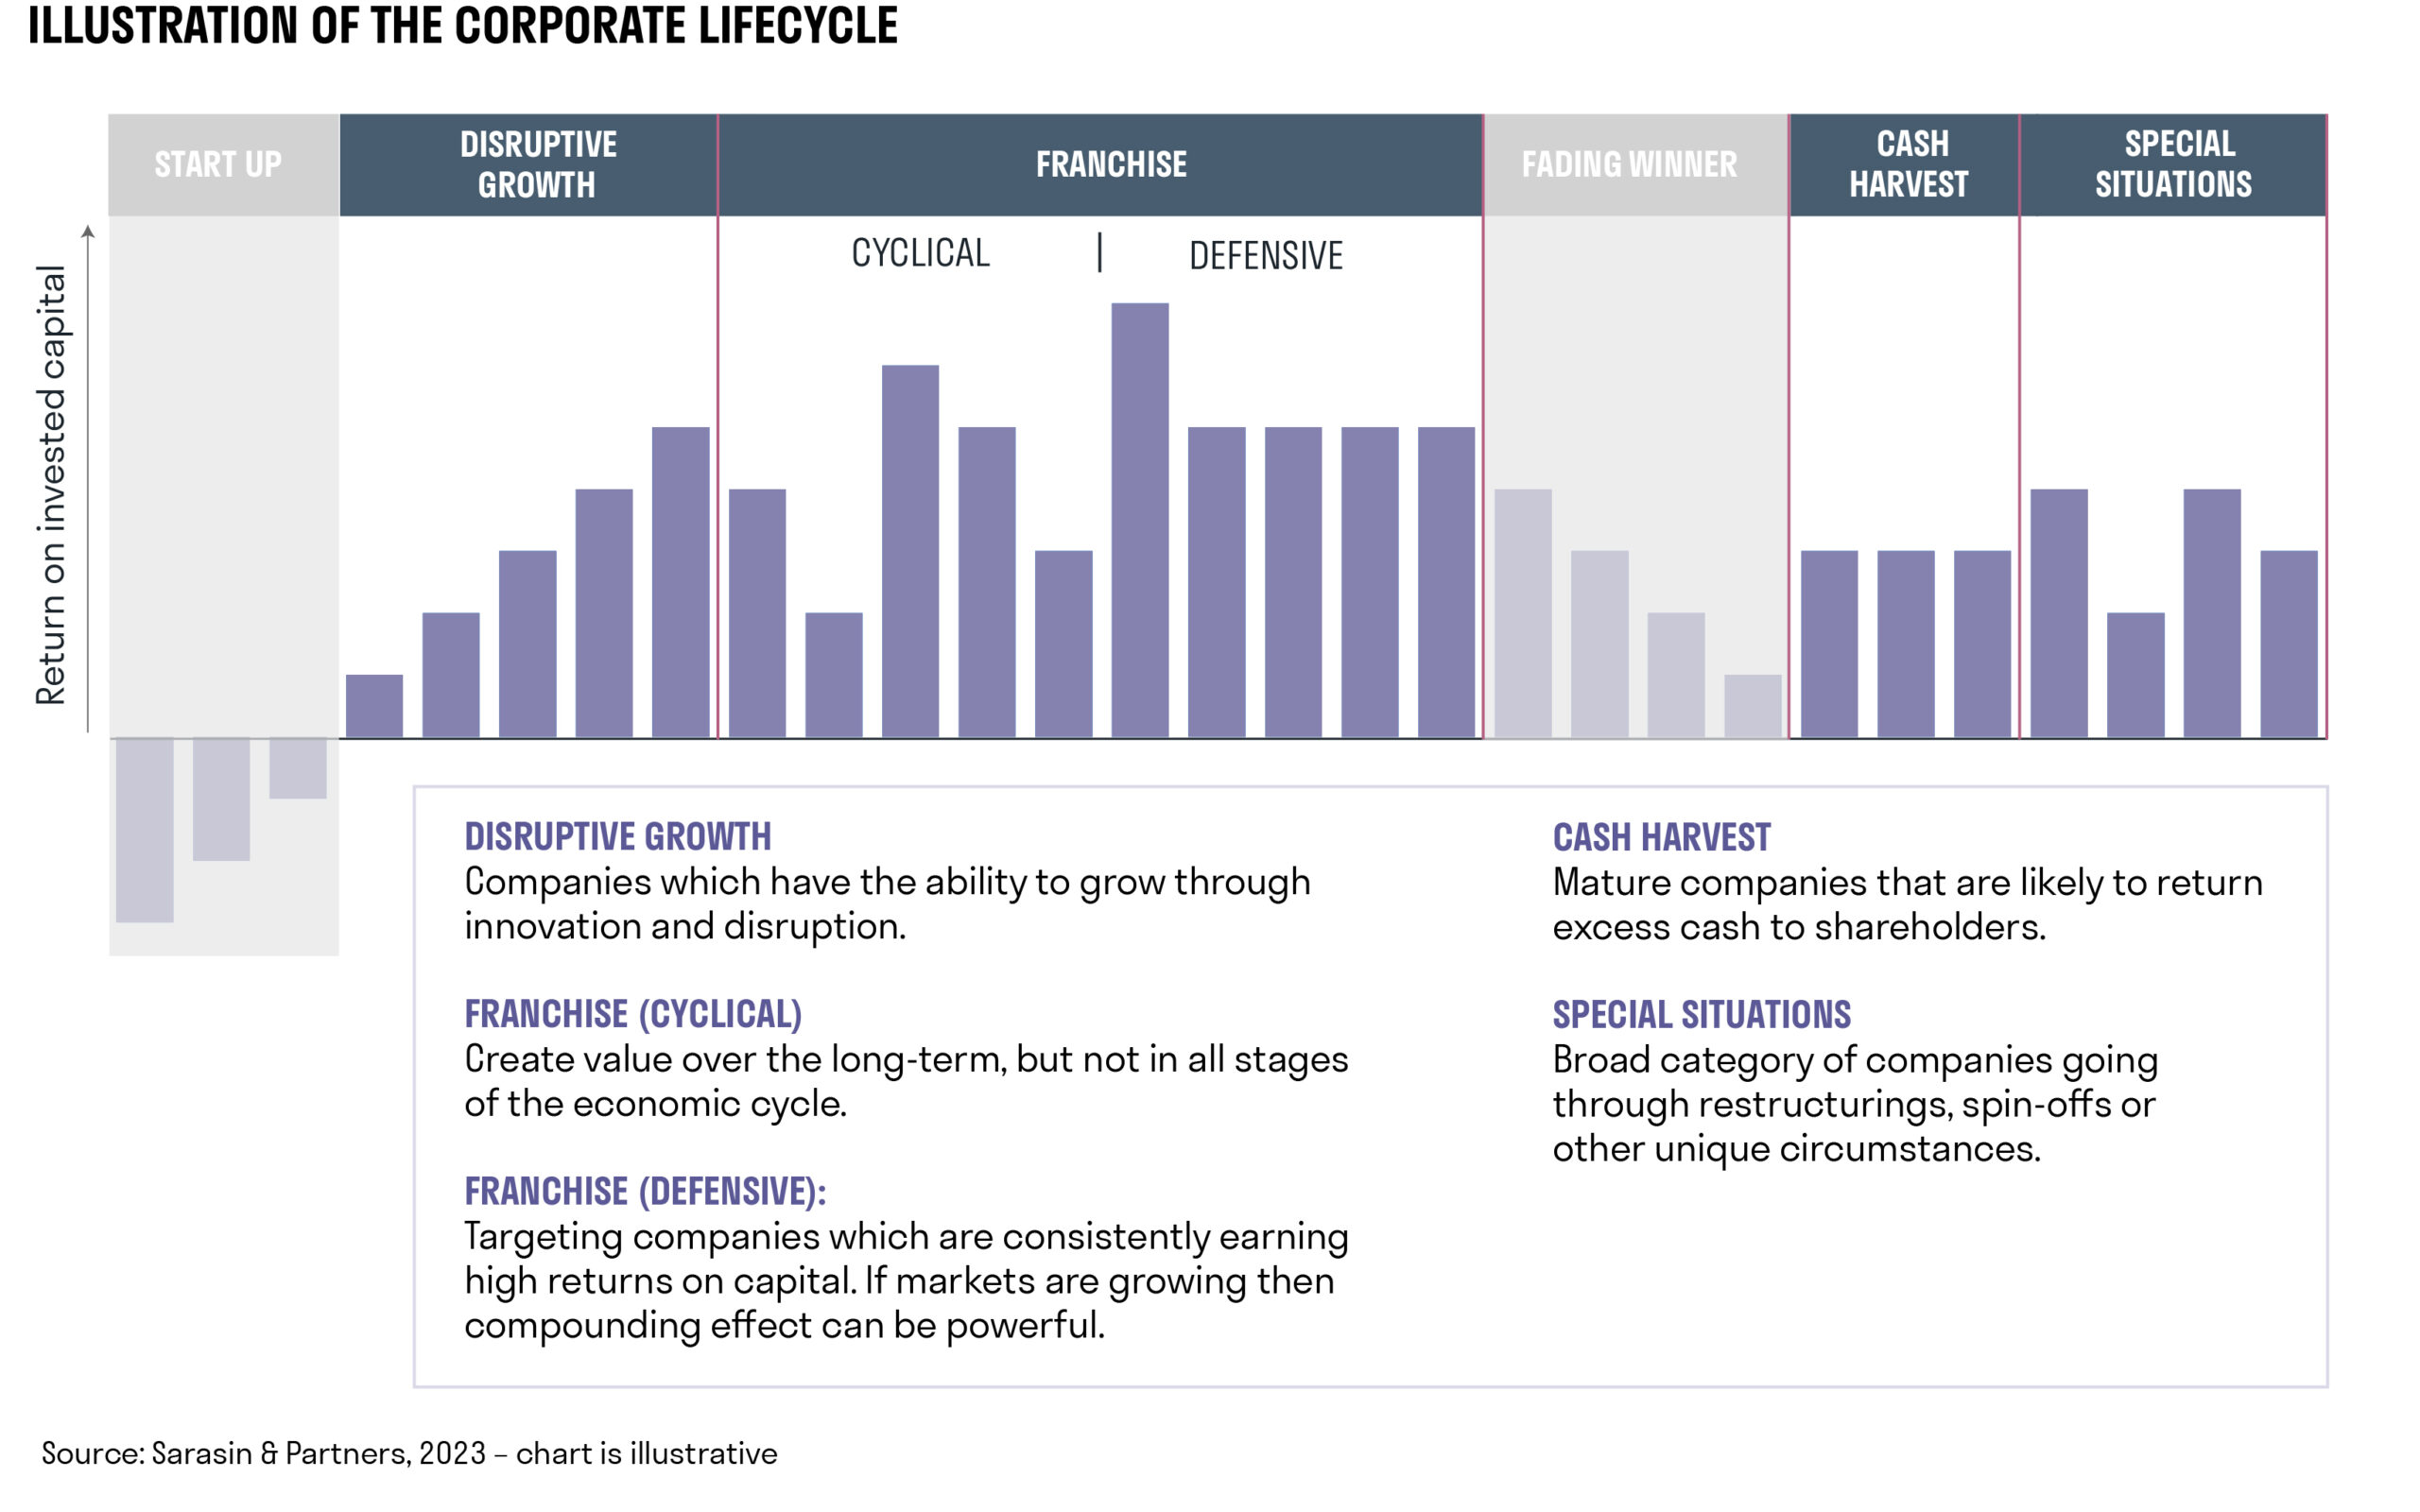 Chart showing the corporate lifecycle of the Sarasin corporate characteristics